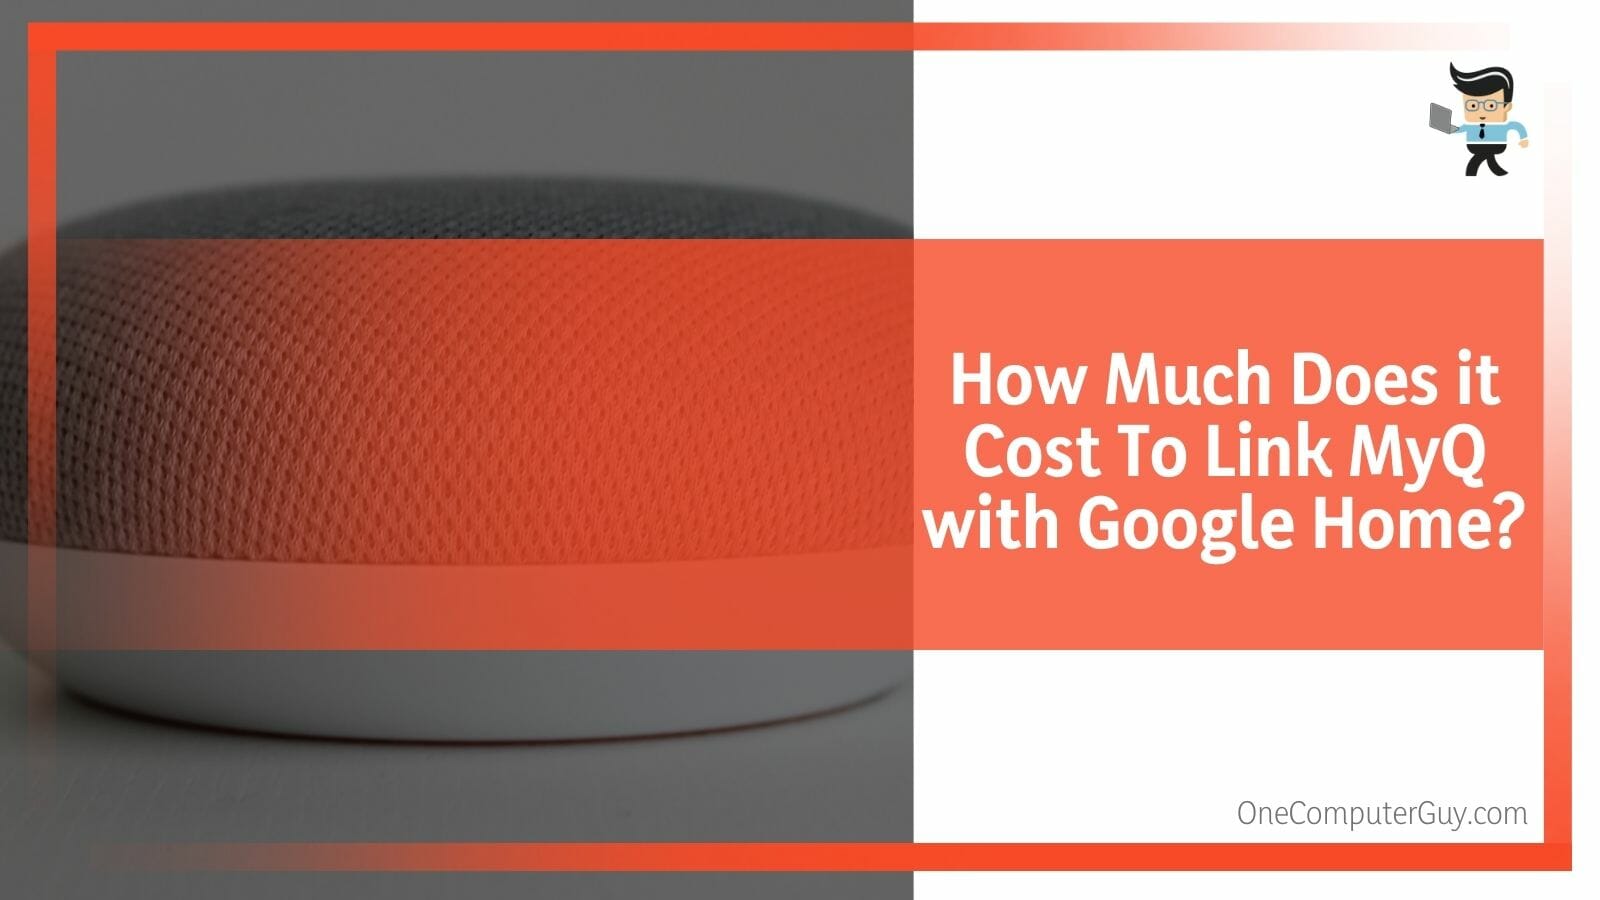 Cost To Link MyQ with Google Home